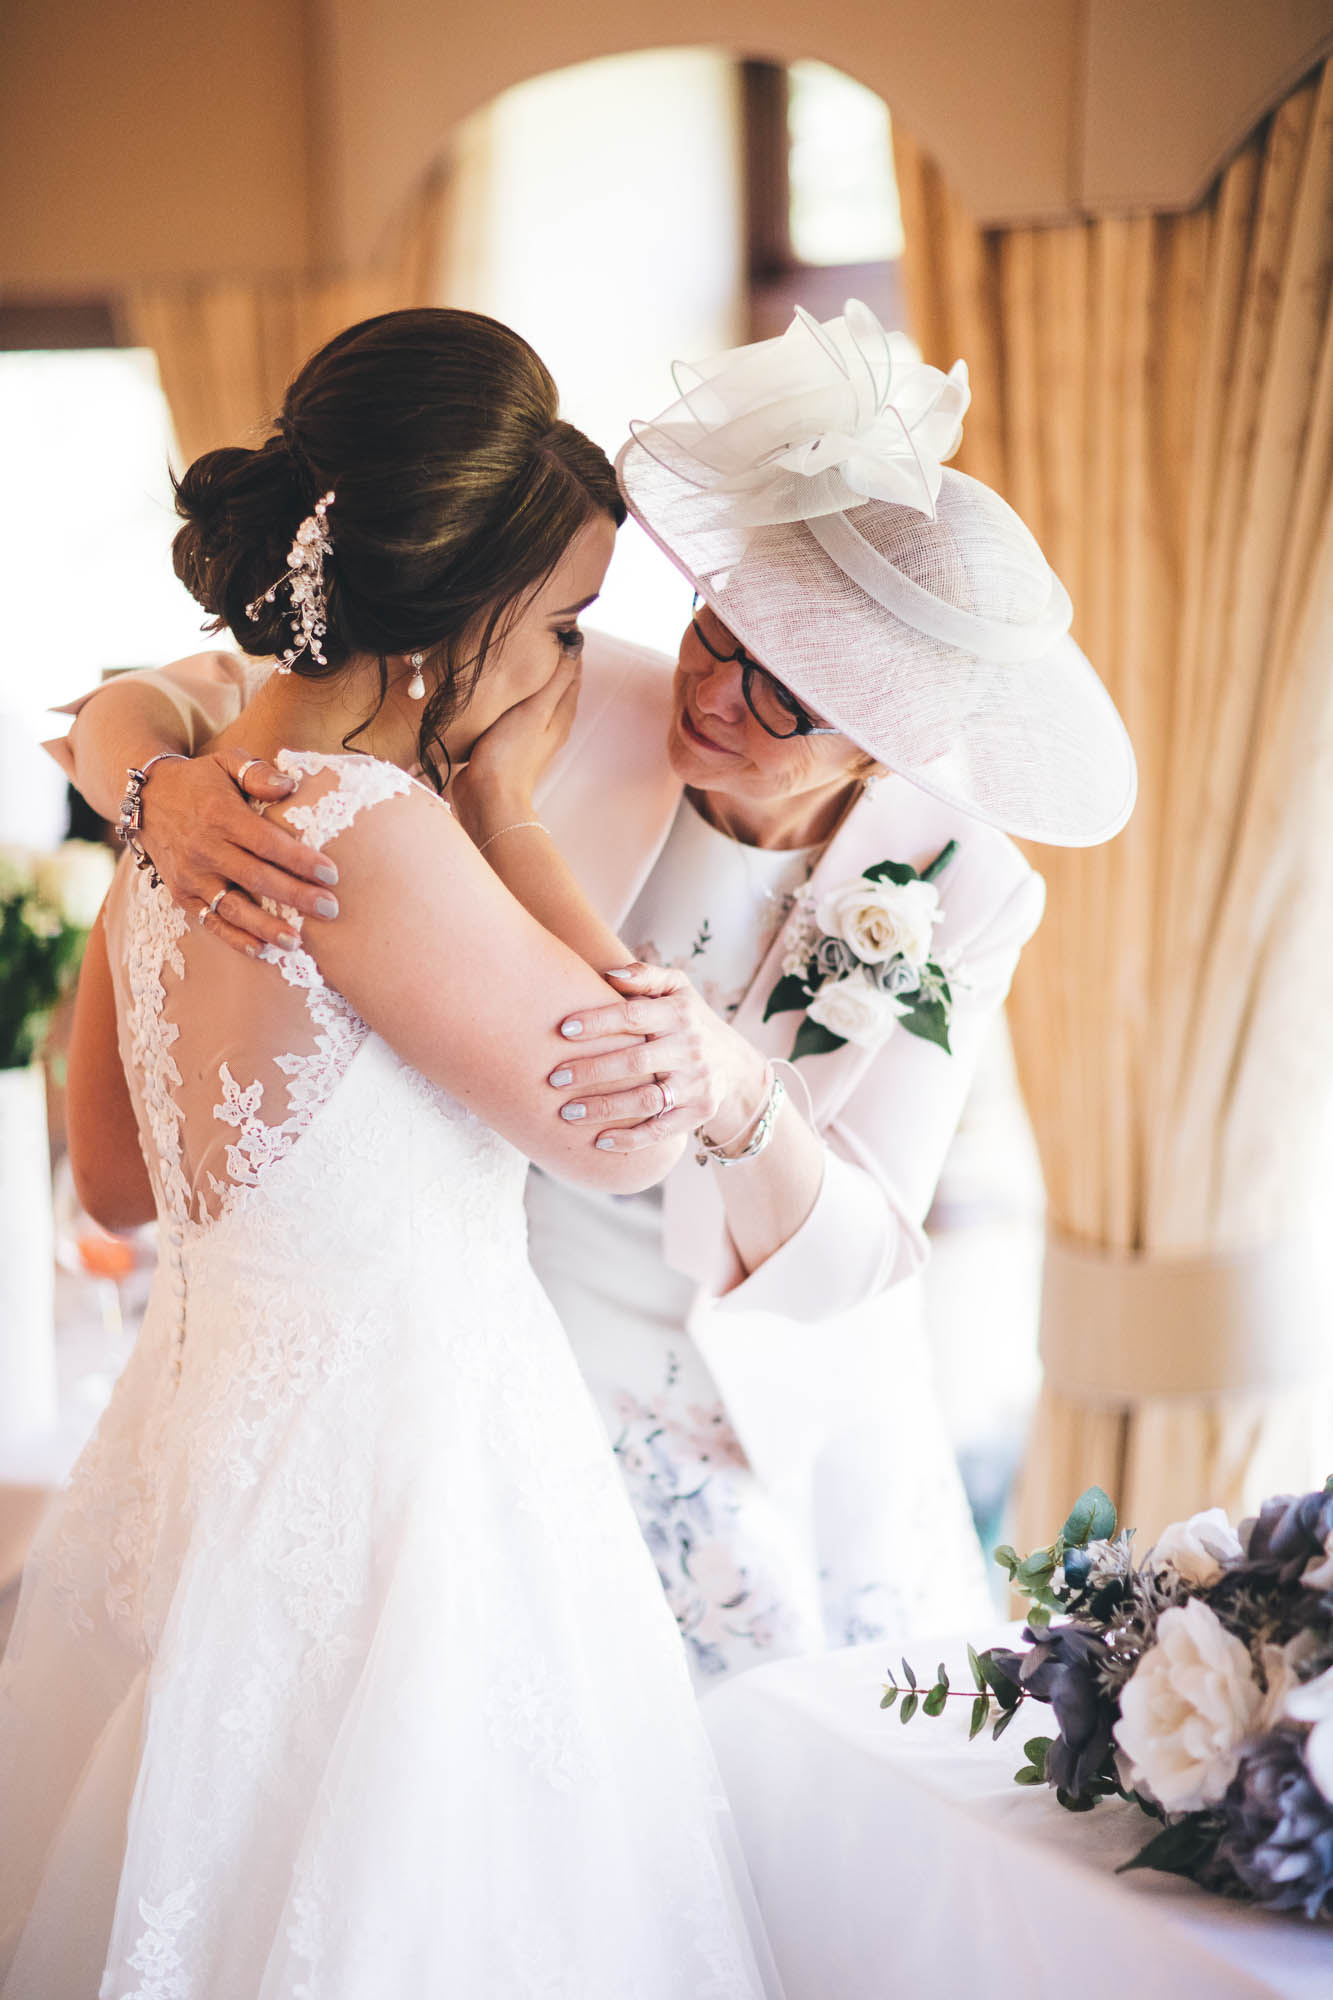 Bride and Mother of Bride share an emotional moment at the Wedding Reception